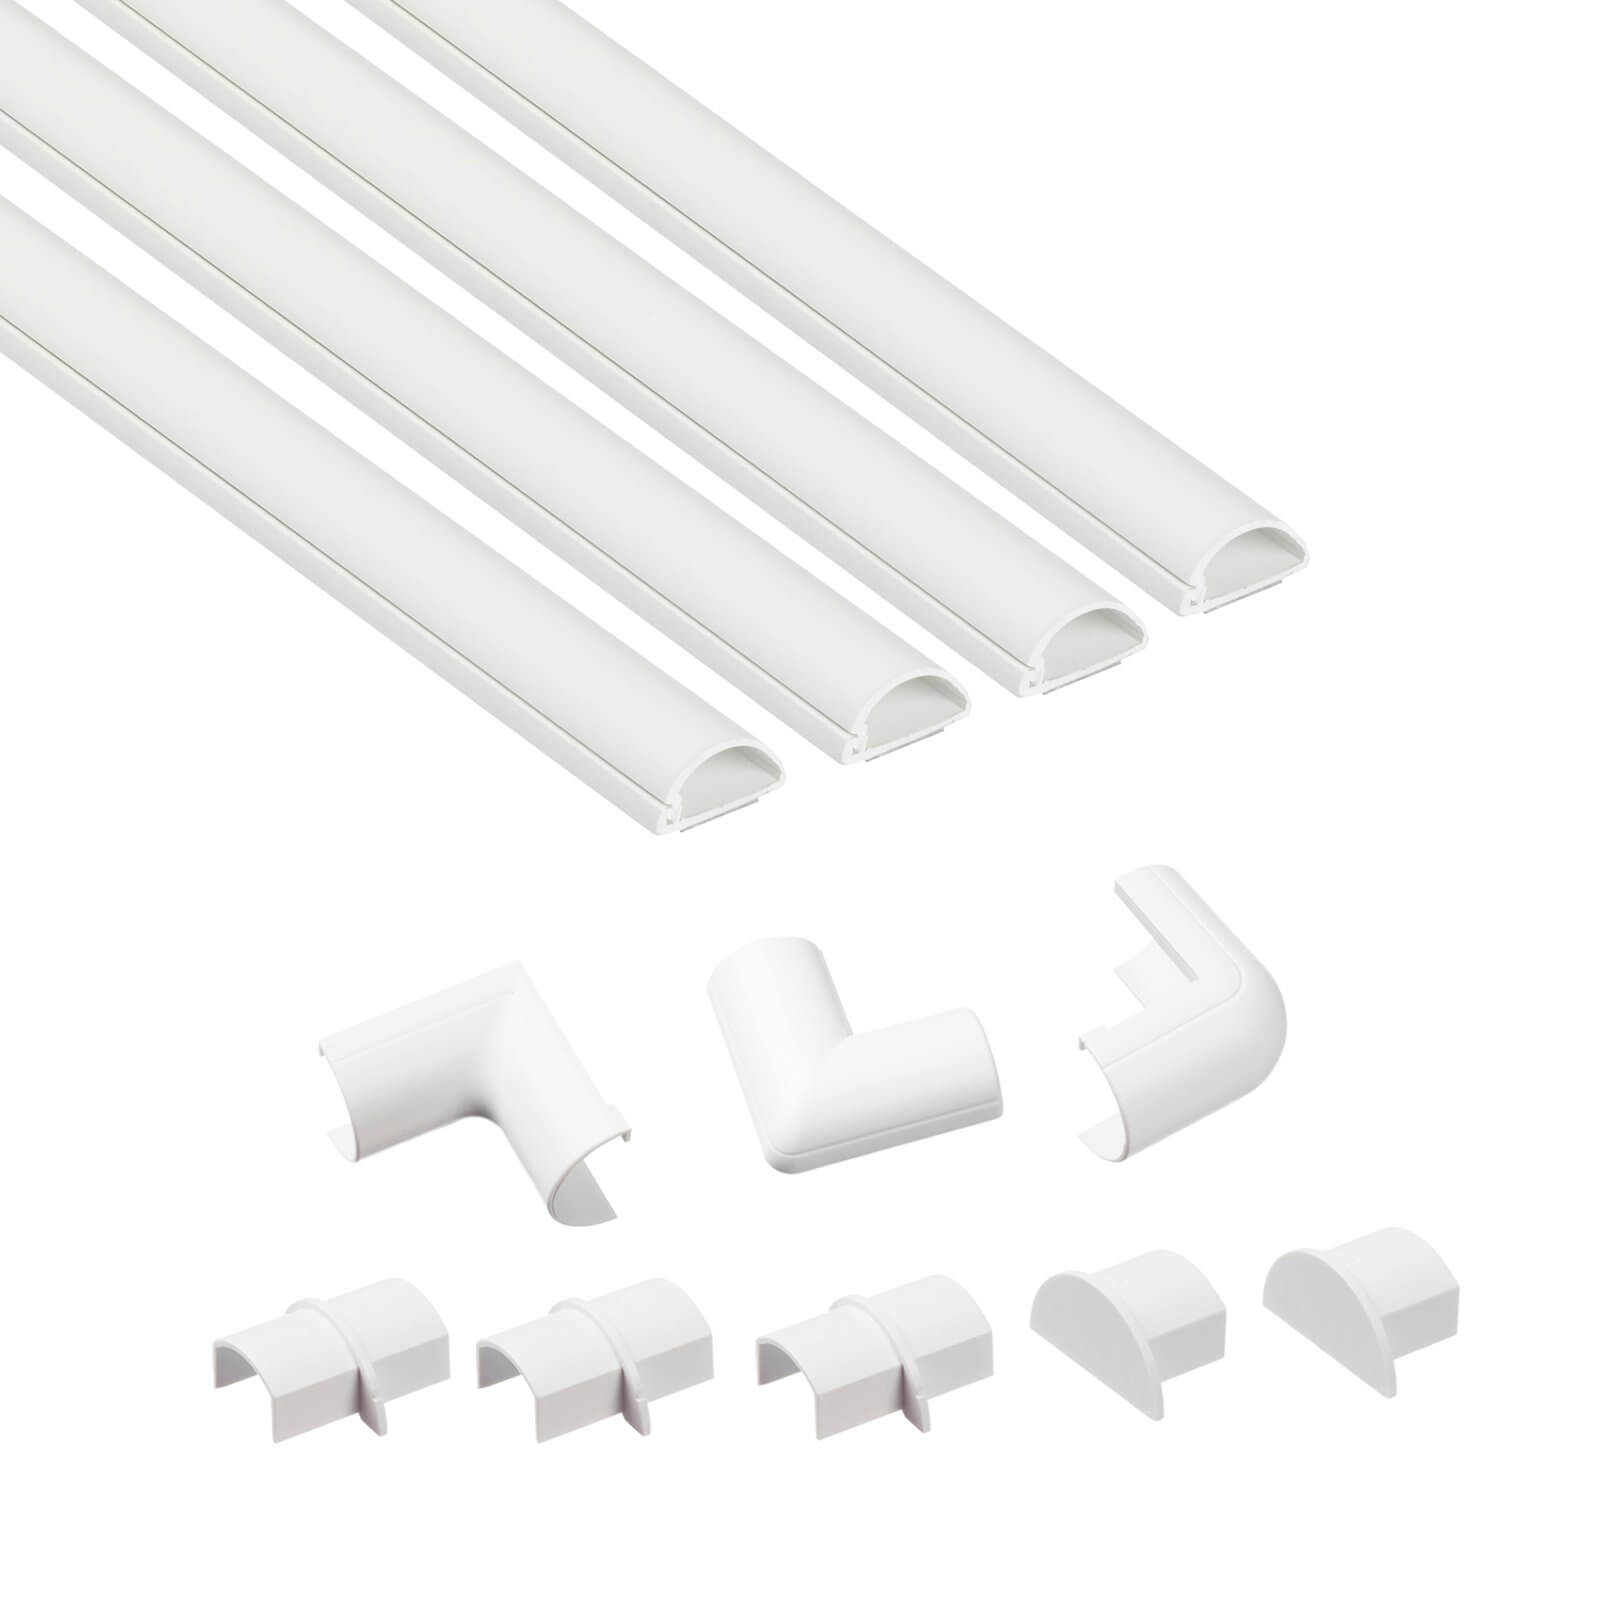 D-Line Micro+ Decorative Self Adhesive Trunking Multipack 4 x 20mm x 10mm x 1-meter Lengths & Accessories - White